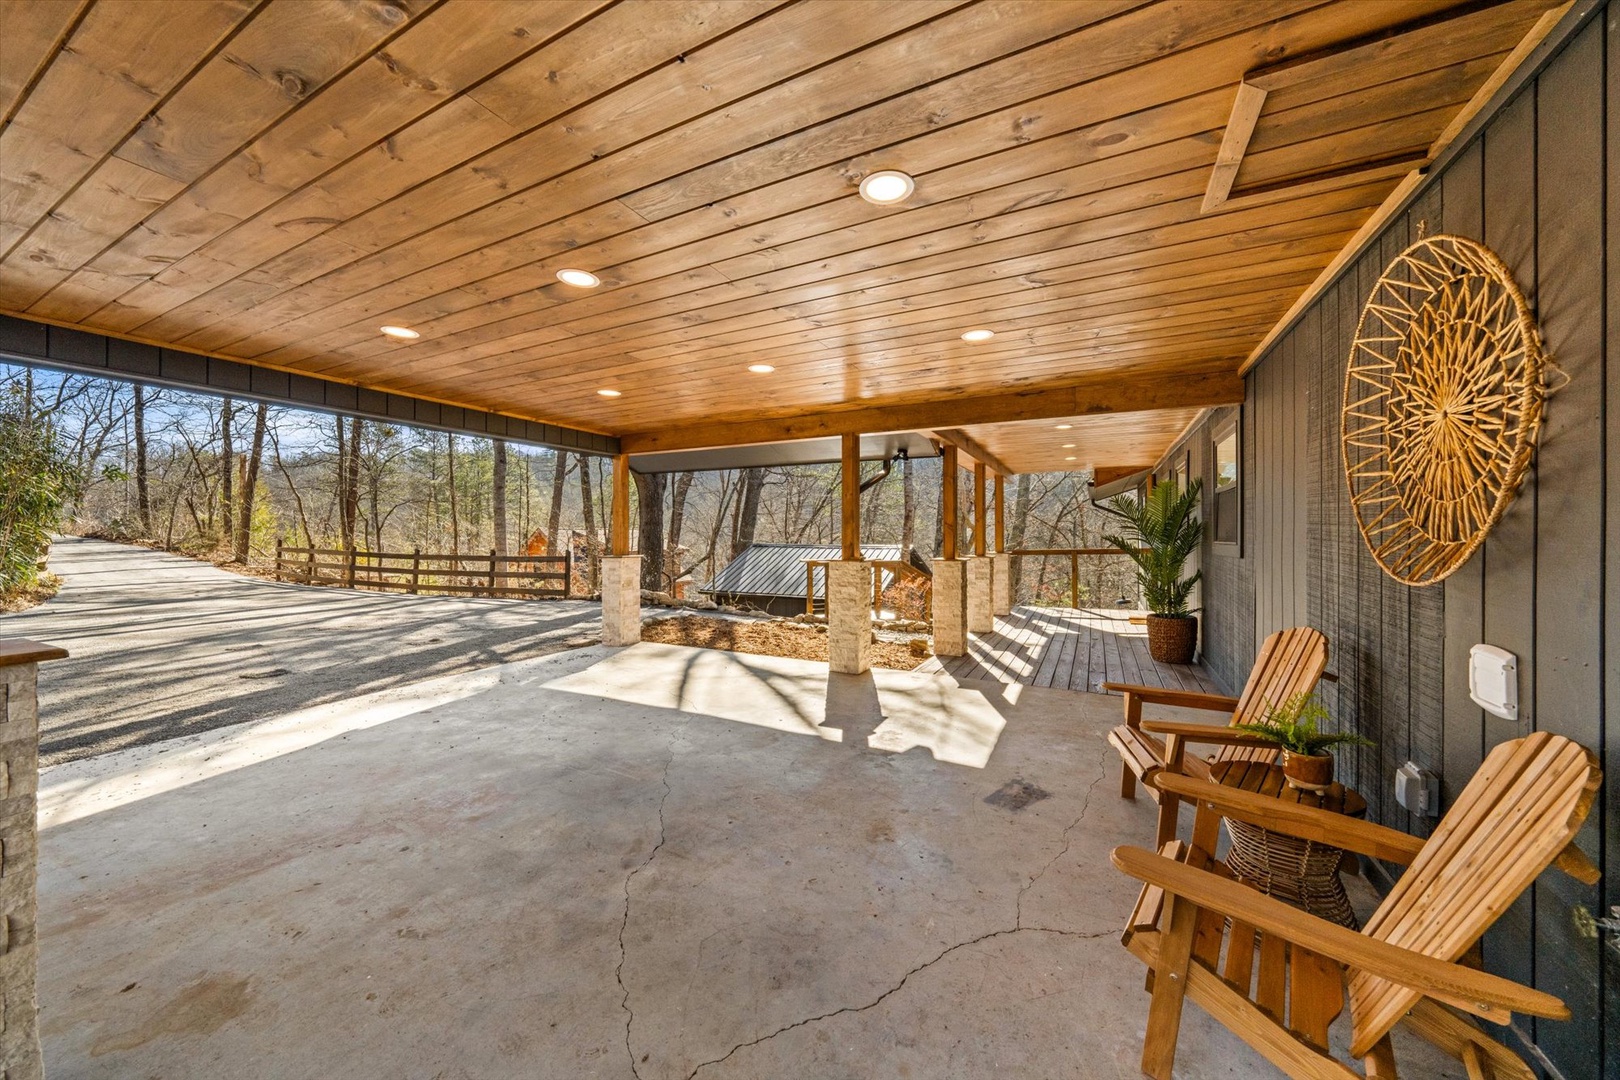 Enjoy coffee or an evening beverage under the shade of the front porch area